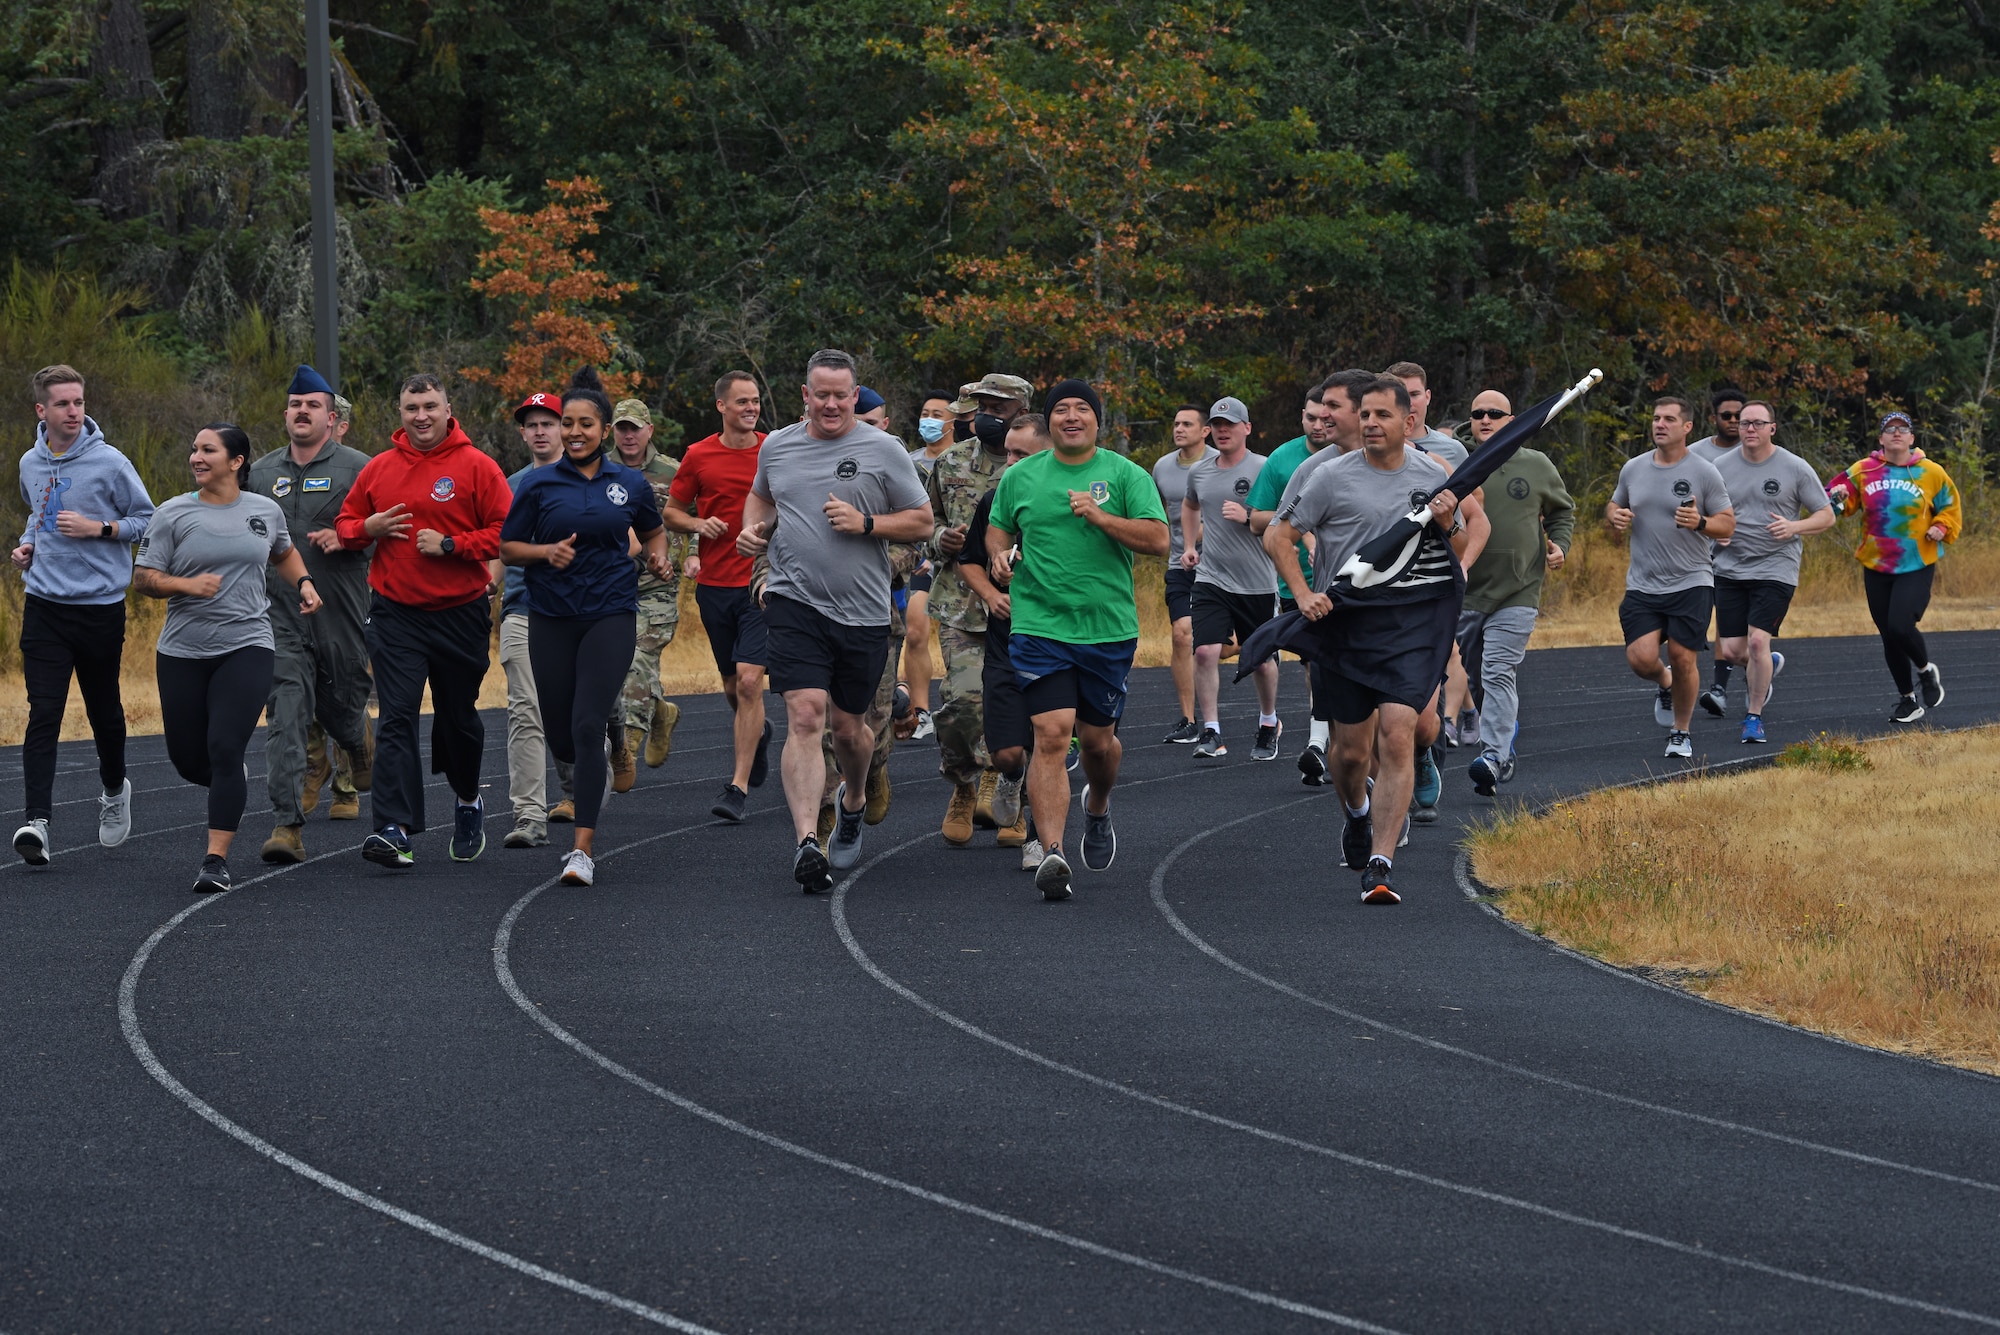 U.S. Airmen with the 62nd Airlift Wing participate in a 24-hour POW/MIA Remembrance Run on the McChord Field track at Joint Base Lewis-McChord, Washington, Sept. 15. 2021. The flag which they carried, the official U.S. POW/MIA flag, was created through the efforts of family members of POW/MIA Americans to display a suitable symbol that made the public aware of their loved ones who were being held prisoner or declared missing during the Vietnam War. (U.S. Air Force photo by Senior Airman Zoe Thacker)